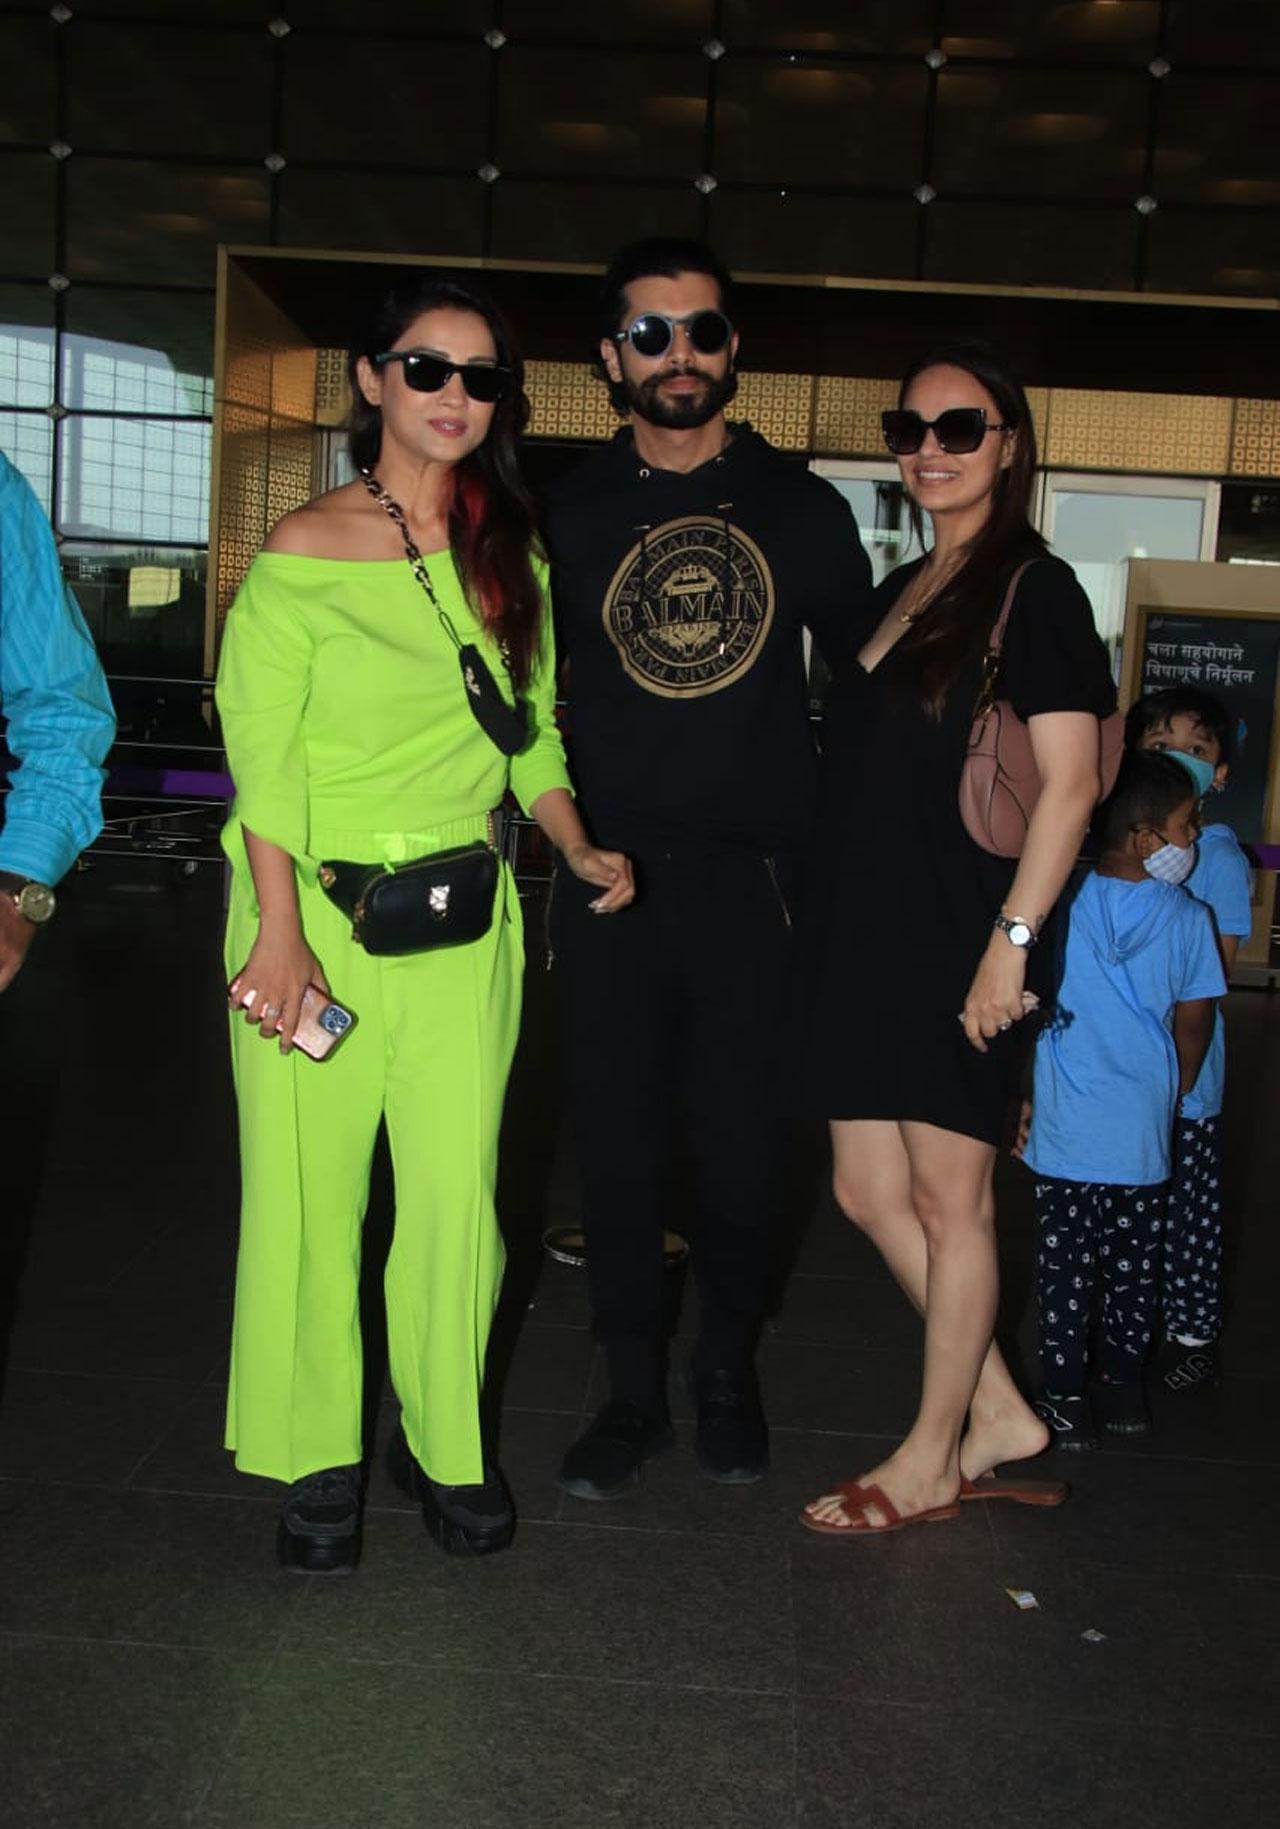 Sharad Malhotra and Ripci Bhatia bumped into 'Naagin' actress Adaa Khan at the airport, who rocked her neon green outfit like a boss.